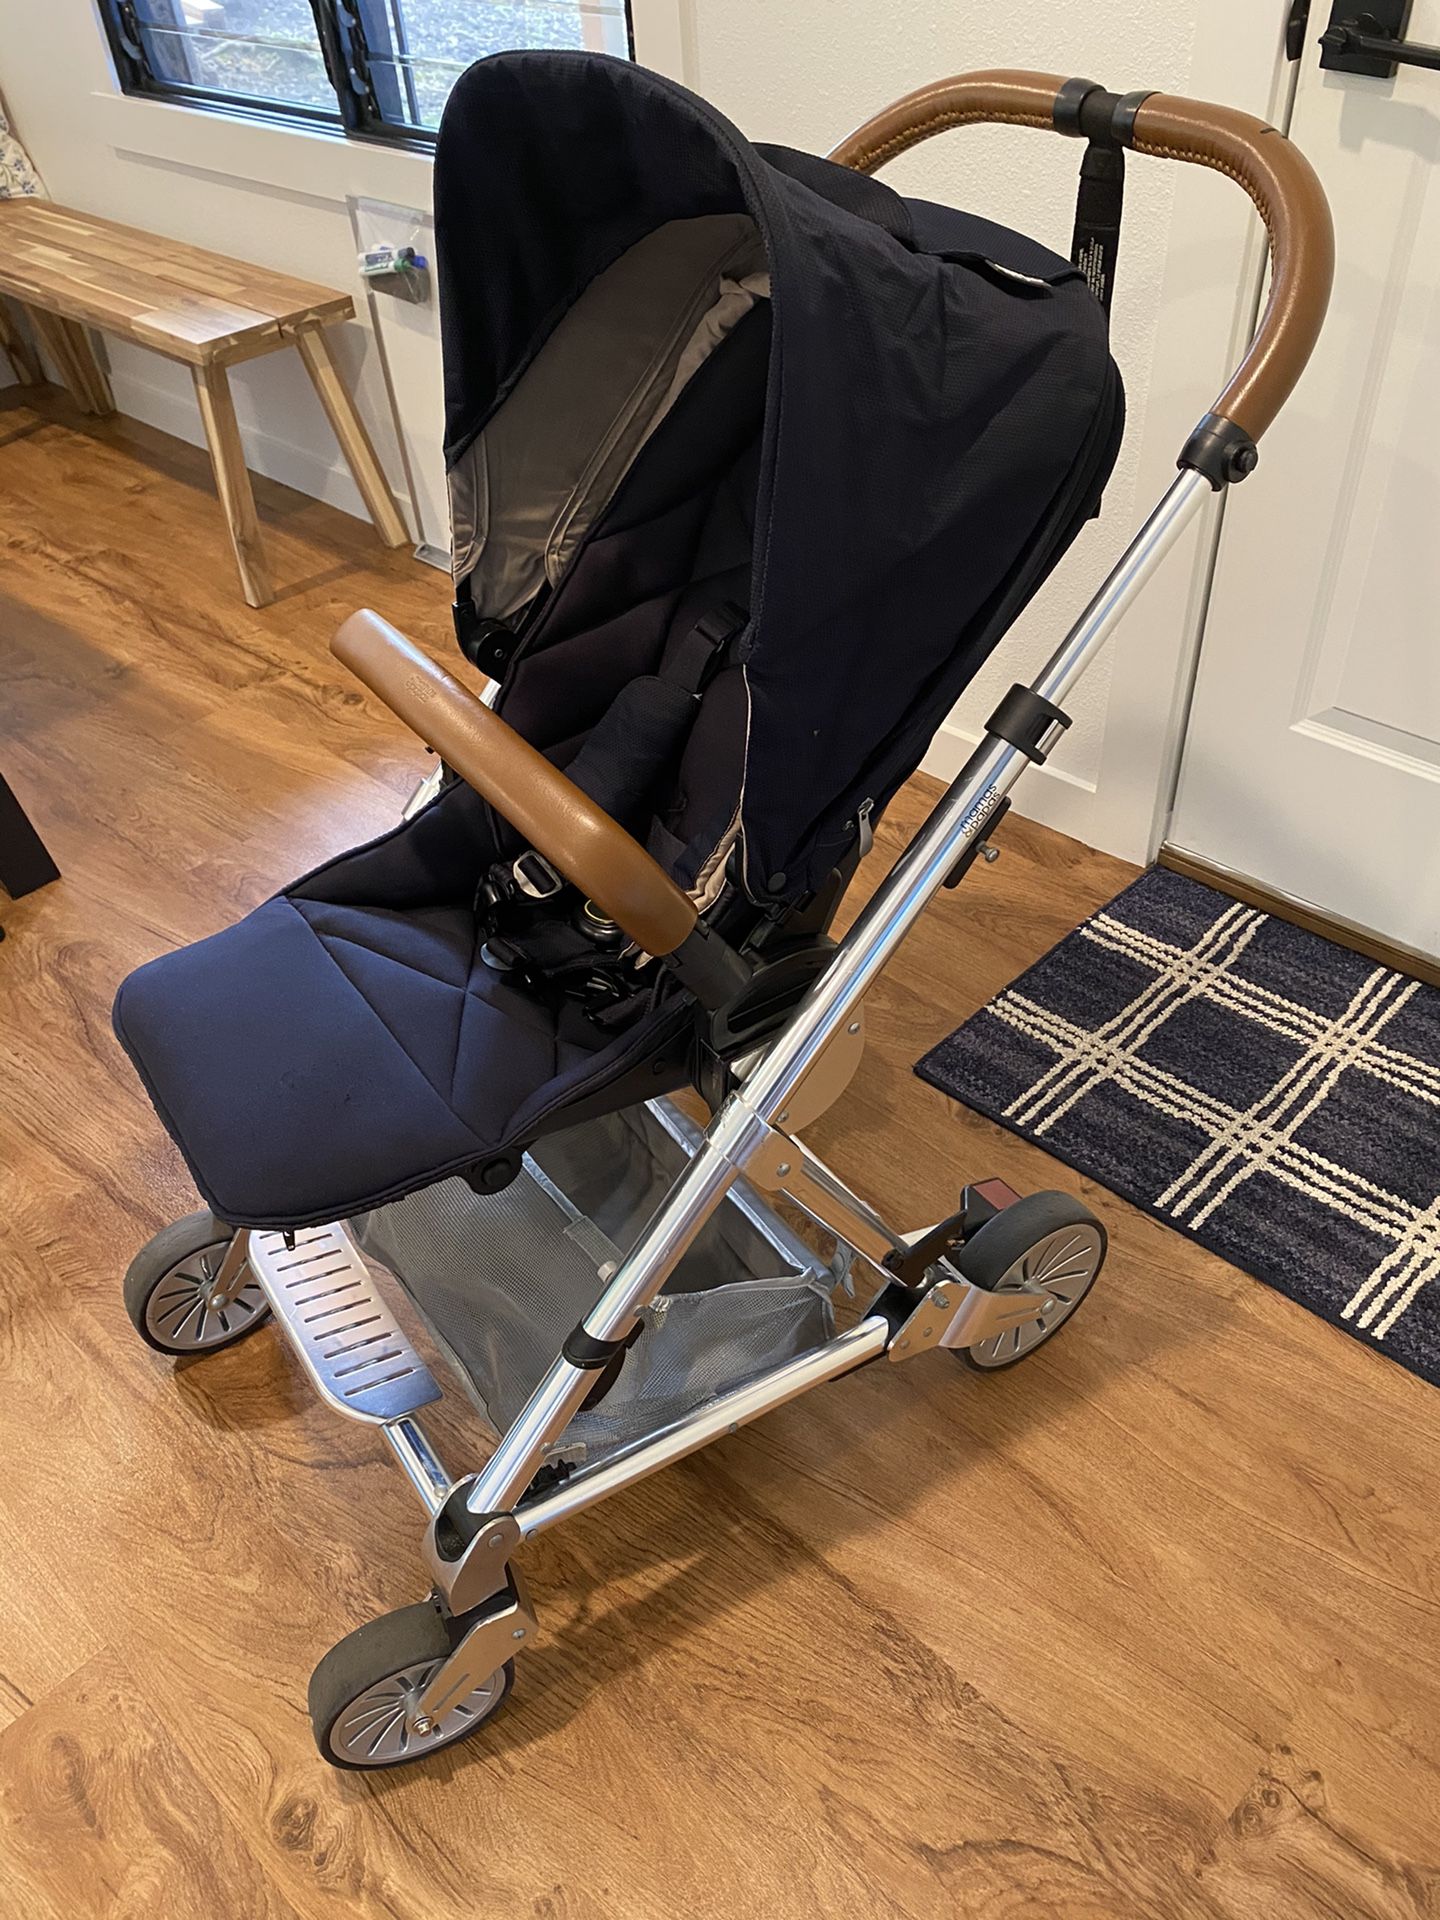 Mamas and papas stroller seat and bassinet